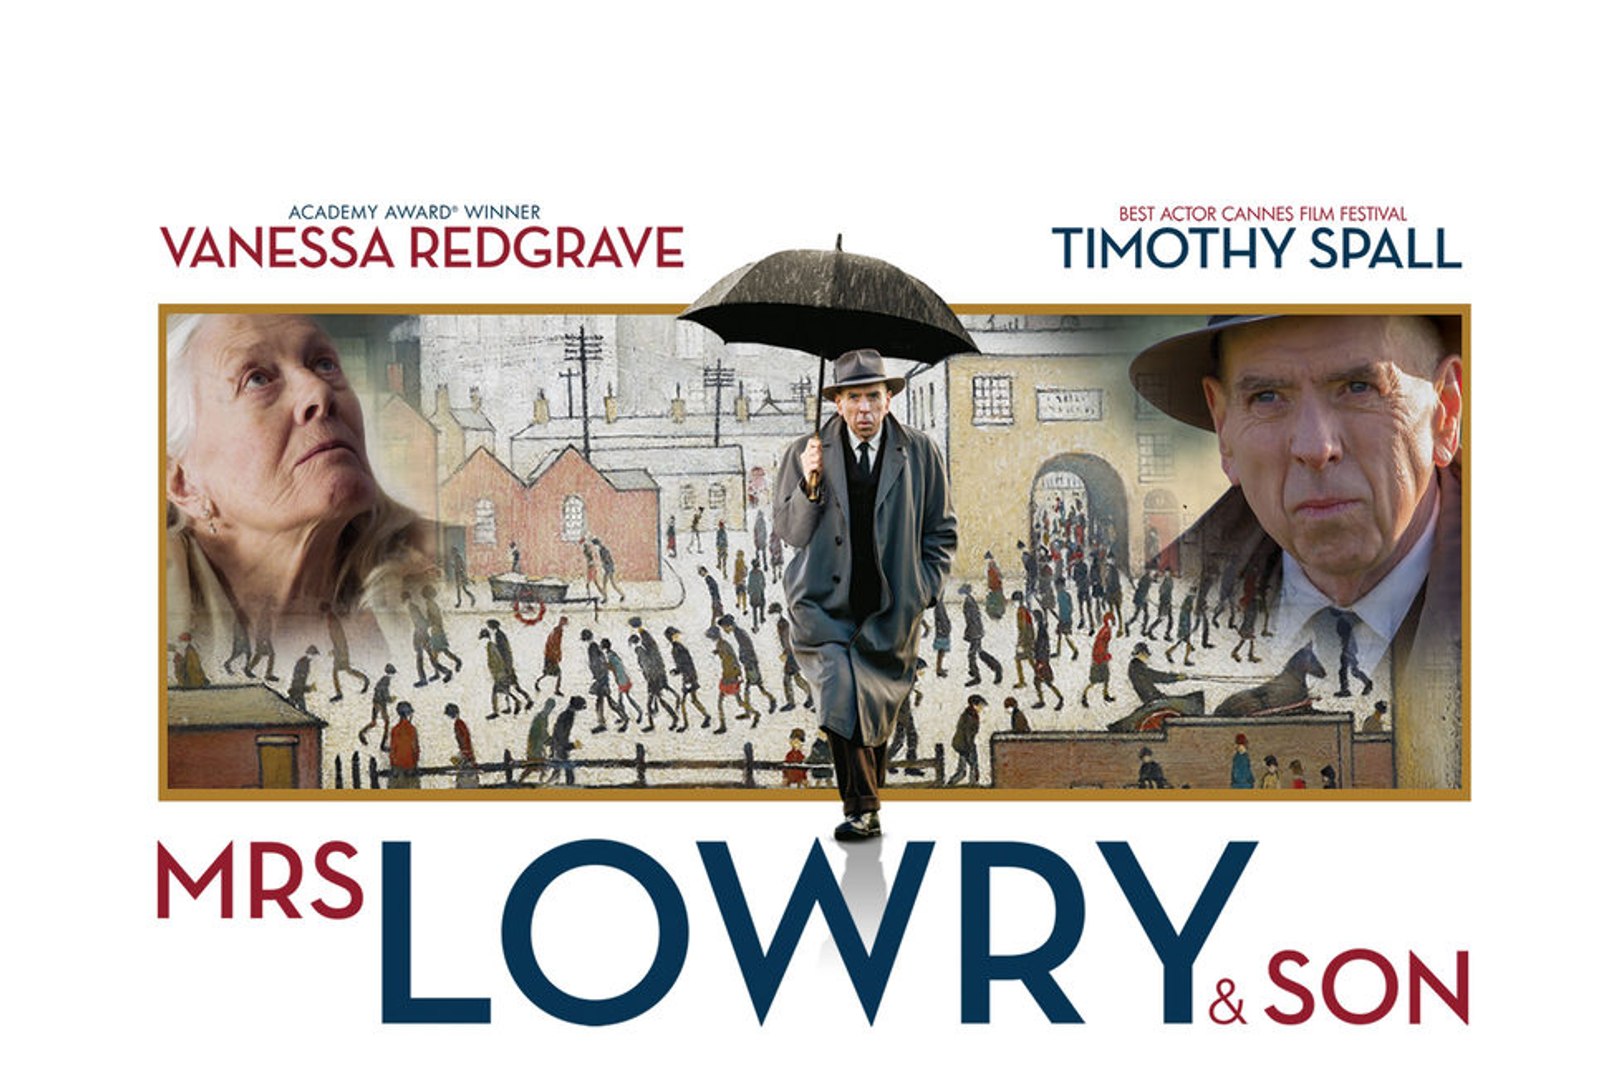 Mrs. Lowry & Son Movie - Vanessa Redgrave, Timothy Spall - video Dailymotion